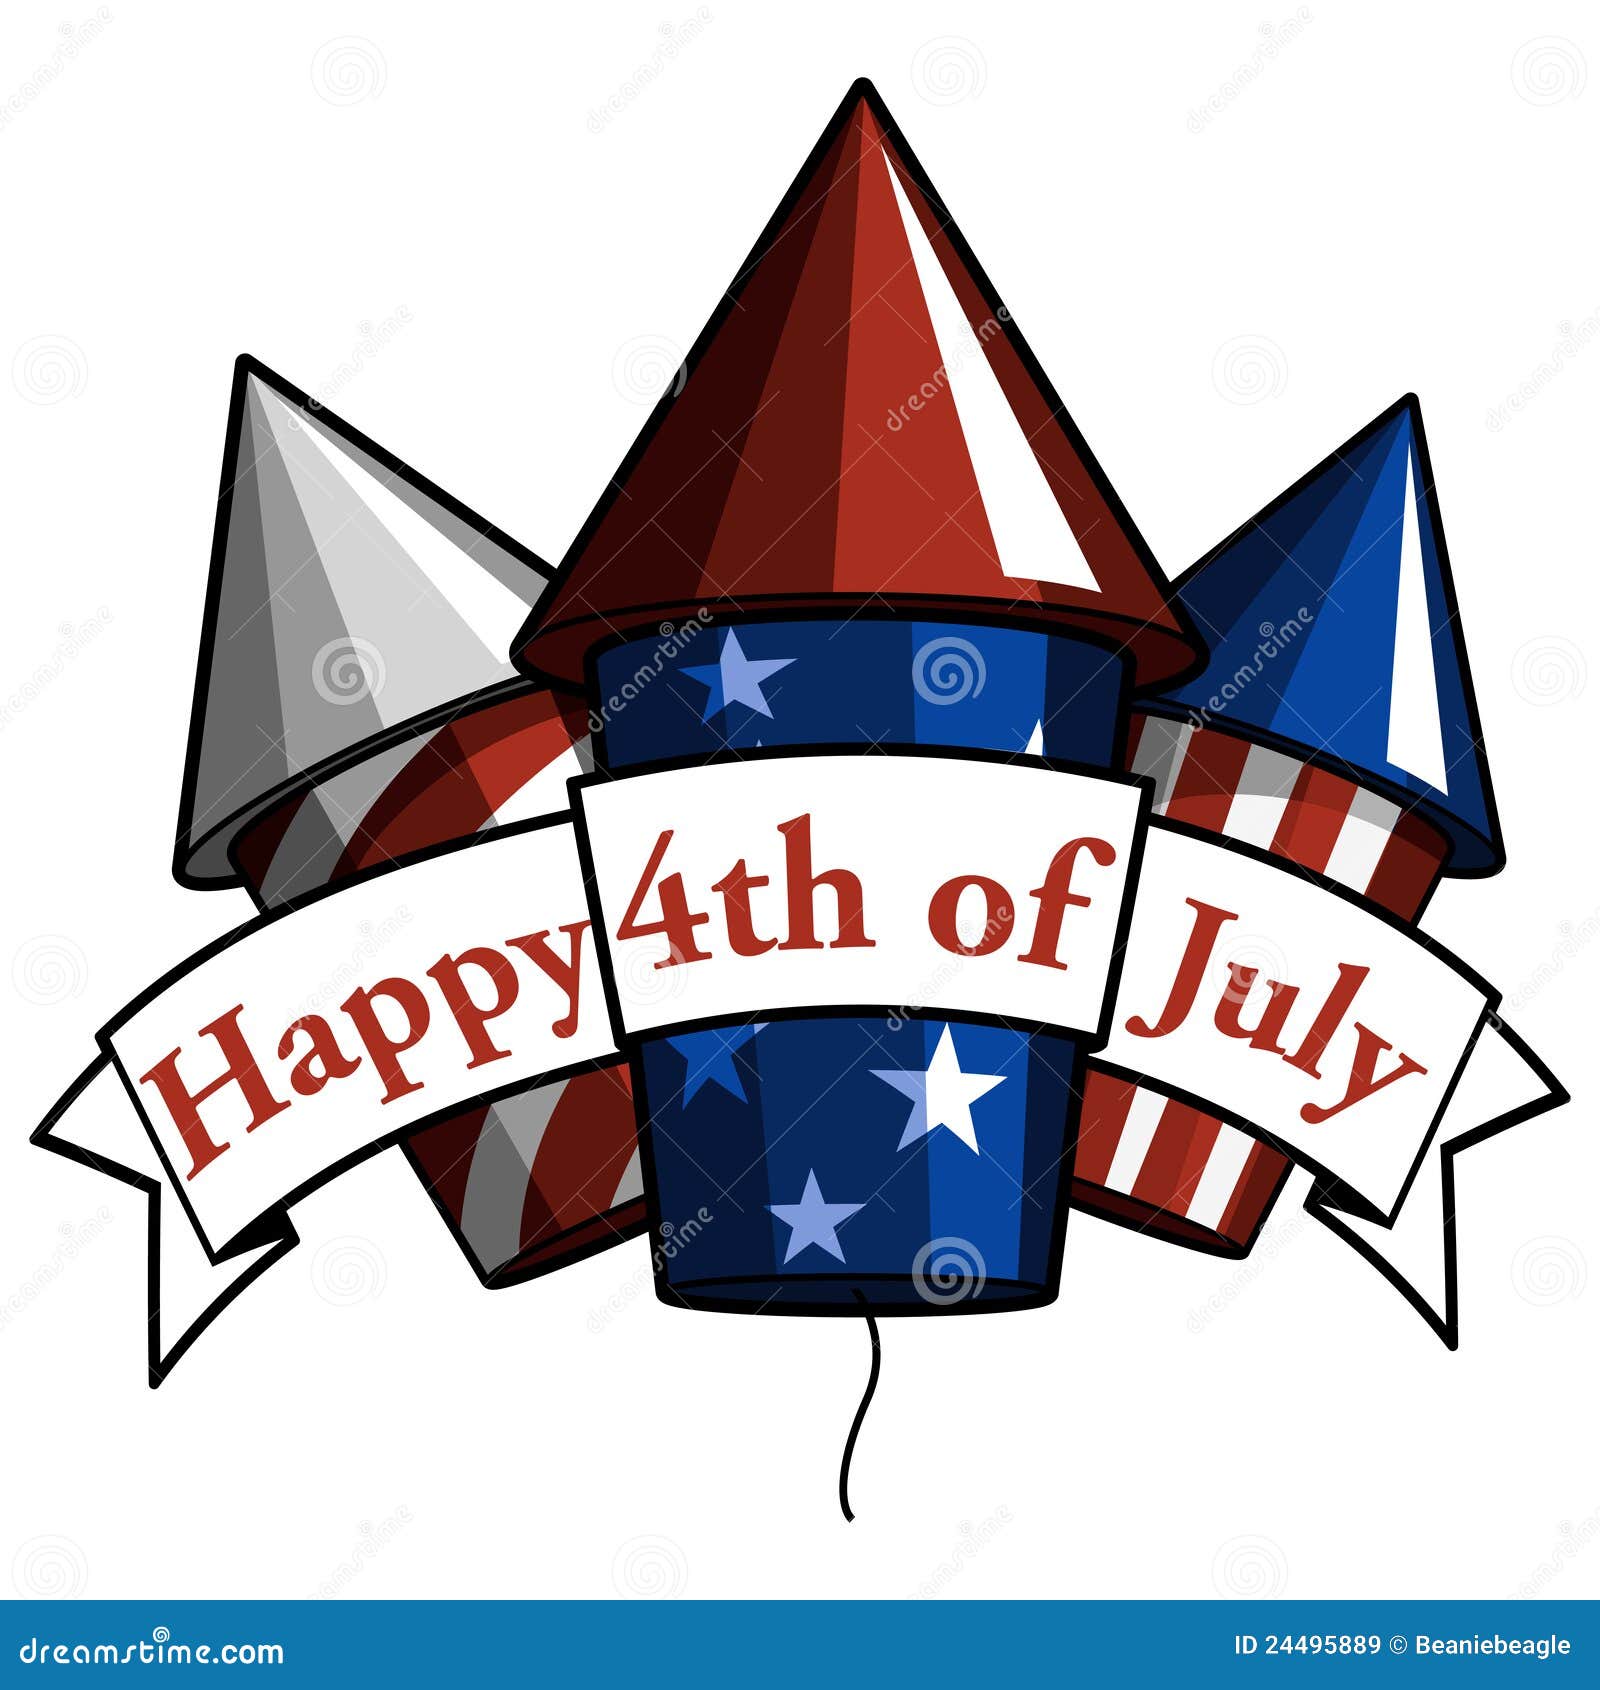 happy 4th of july clipart - photo #43